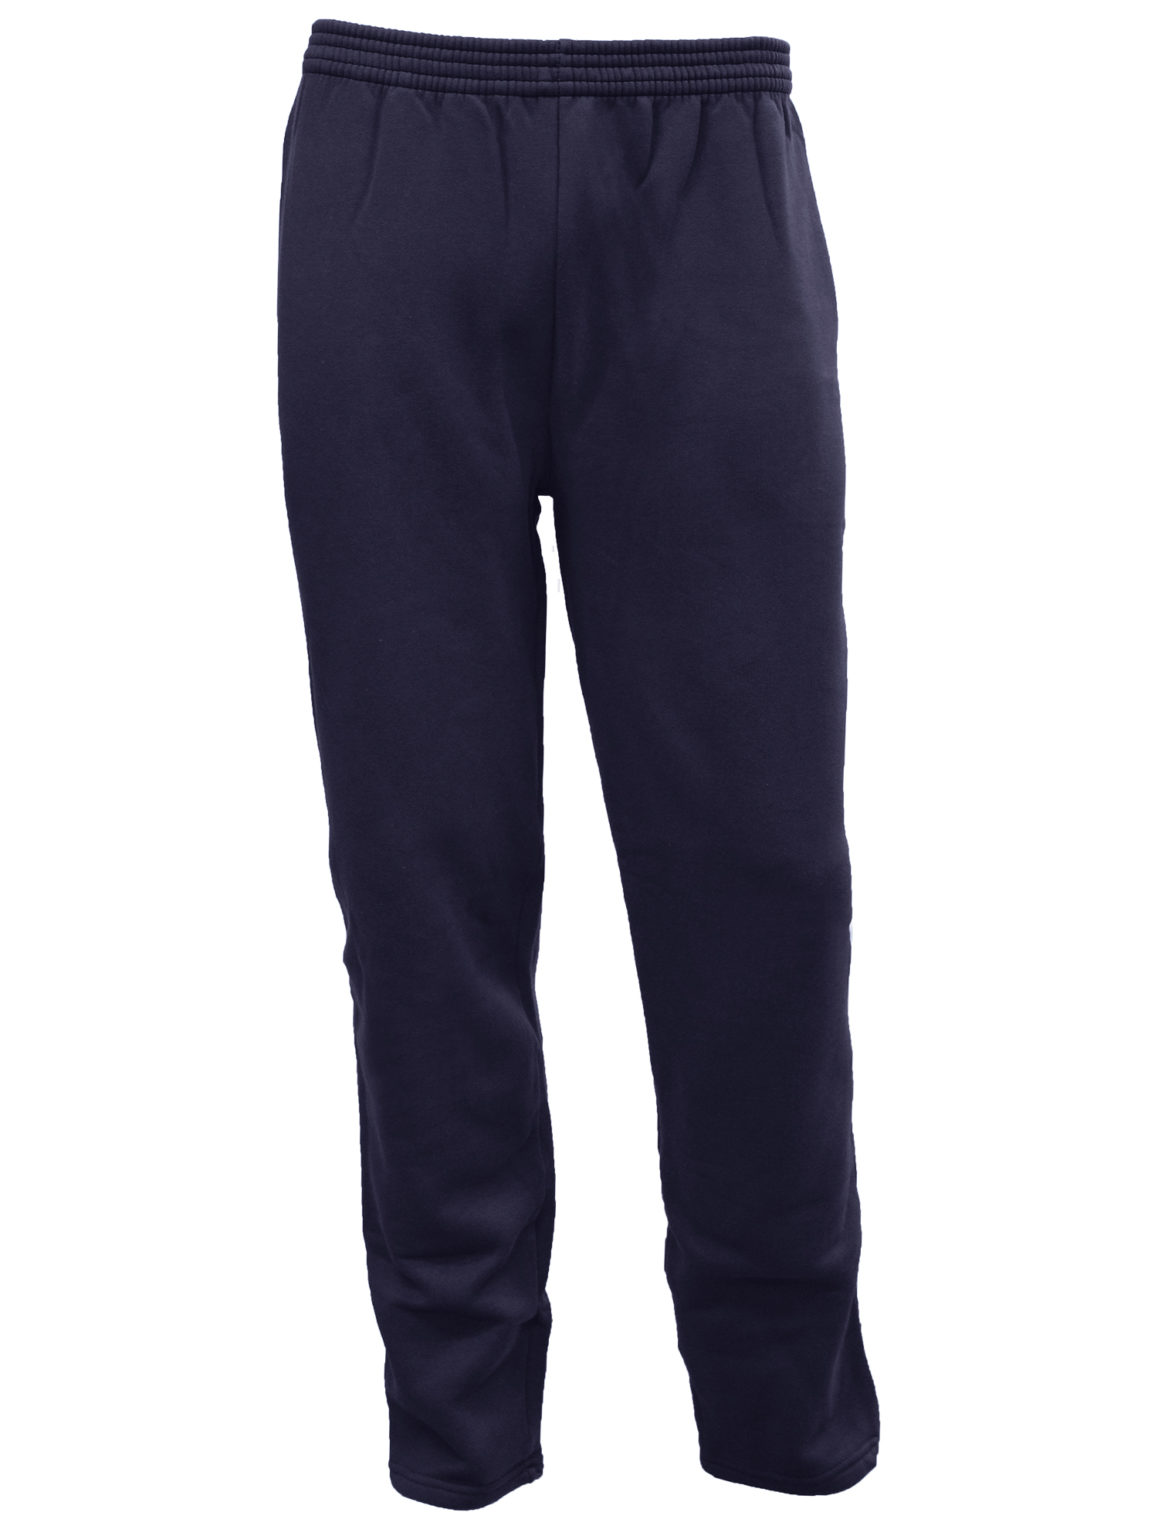 Navy Tracksuit Bottoms (Non-Cuff 2602) - Quality Schoolwear